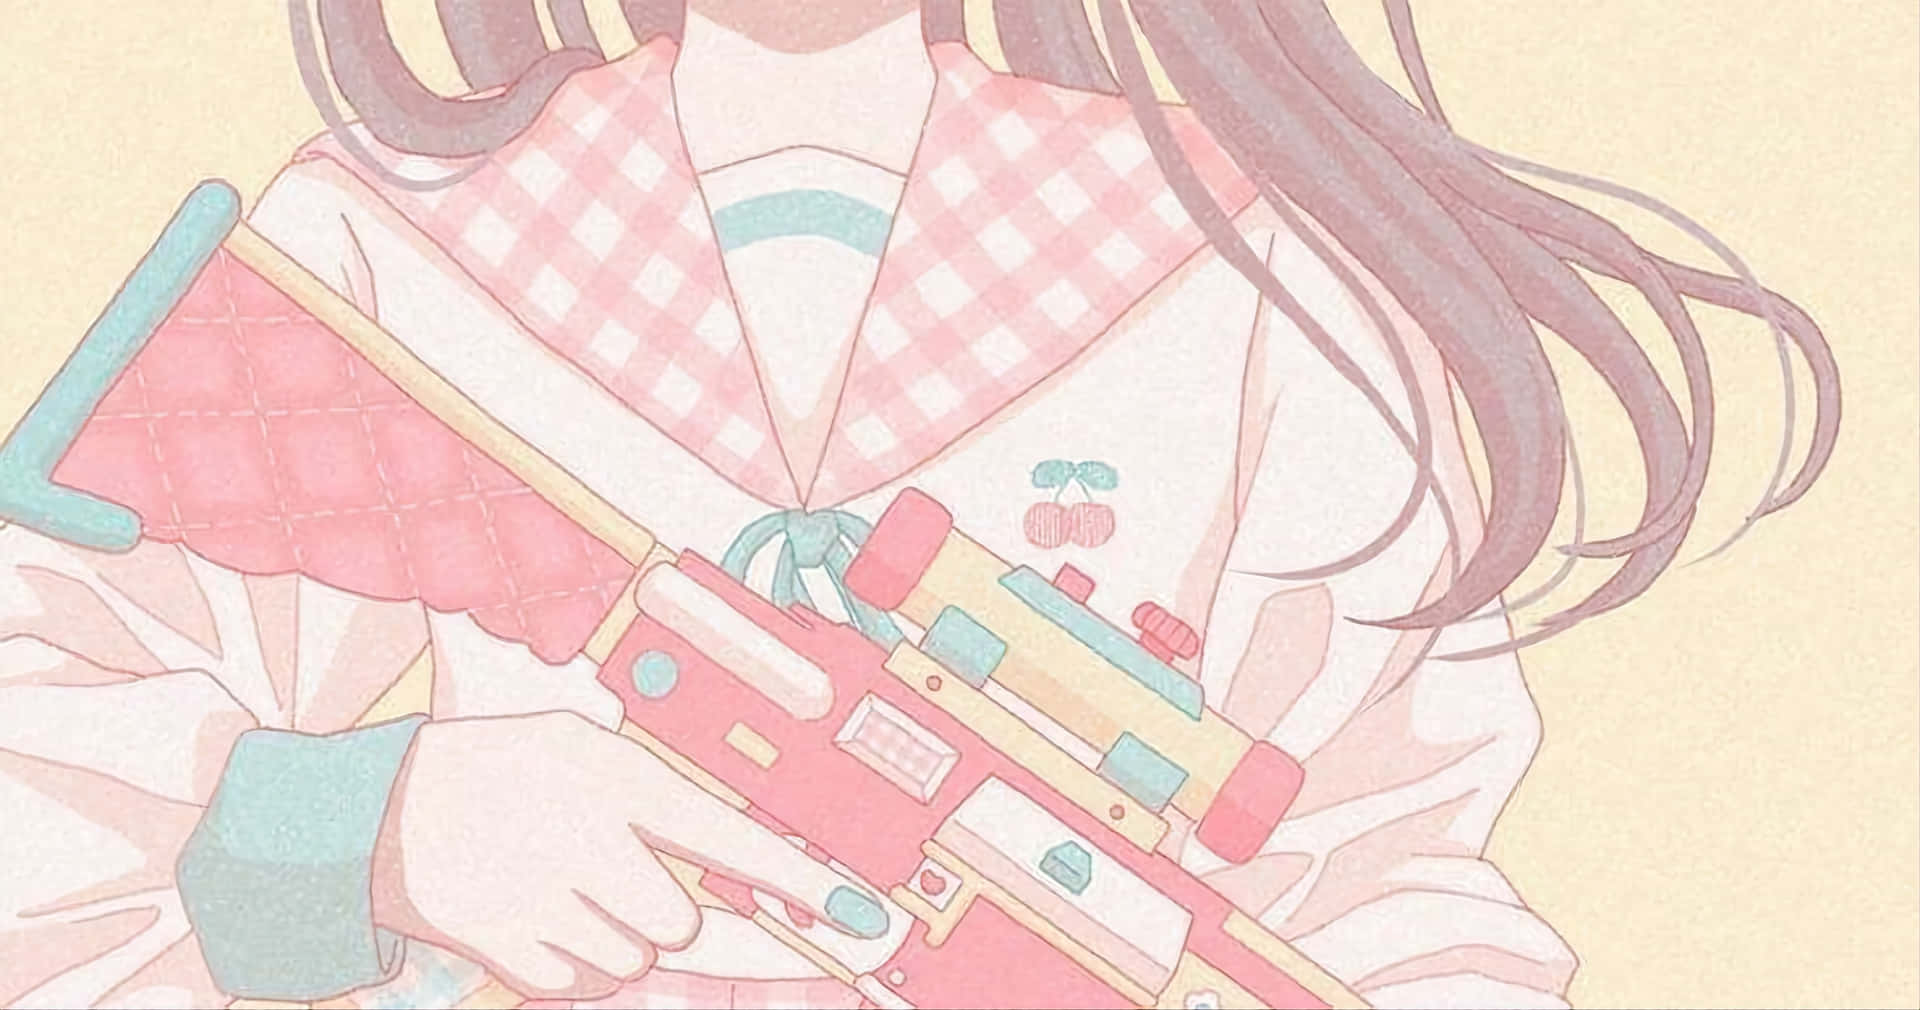 A Girl Holding A Gun With Pink And Blue Stripes